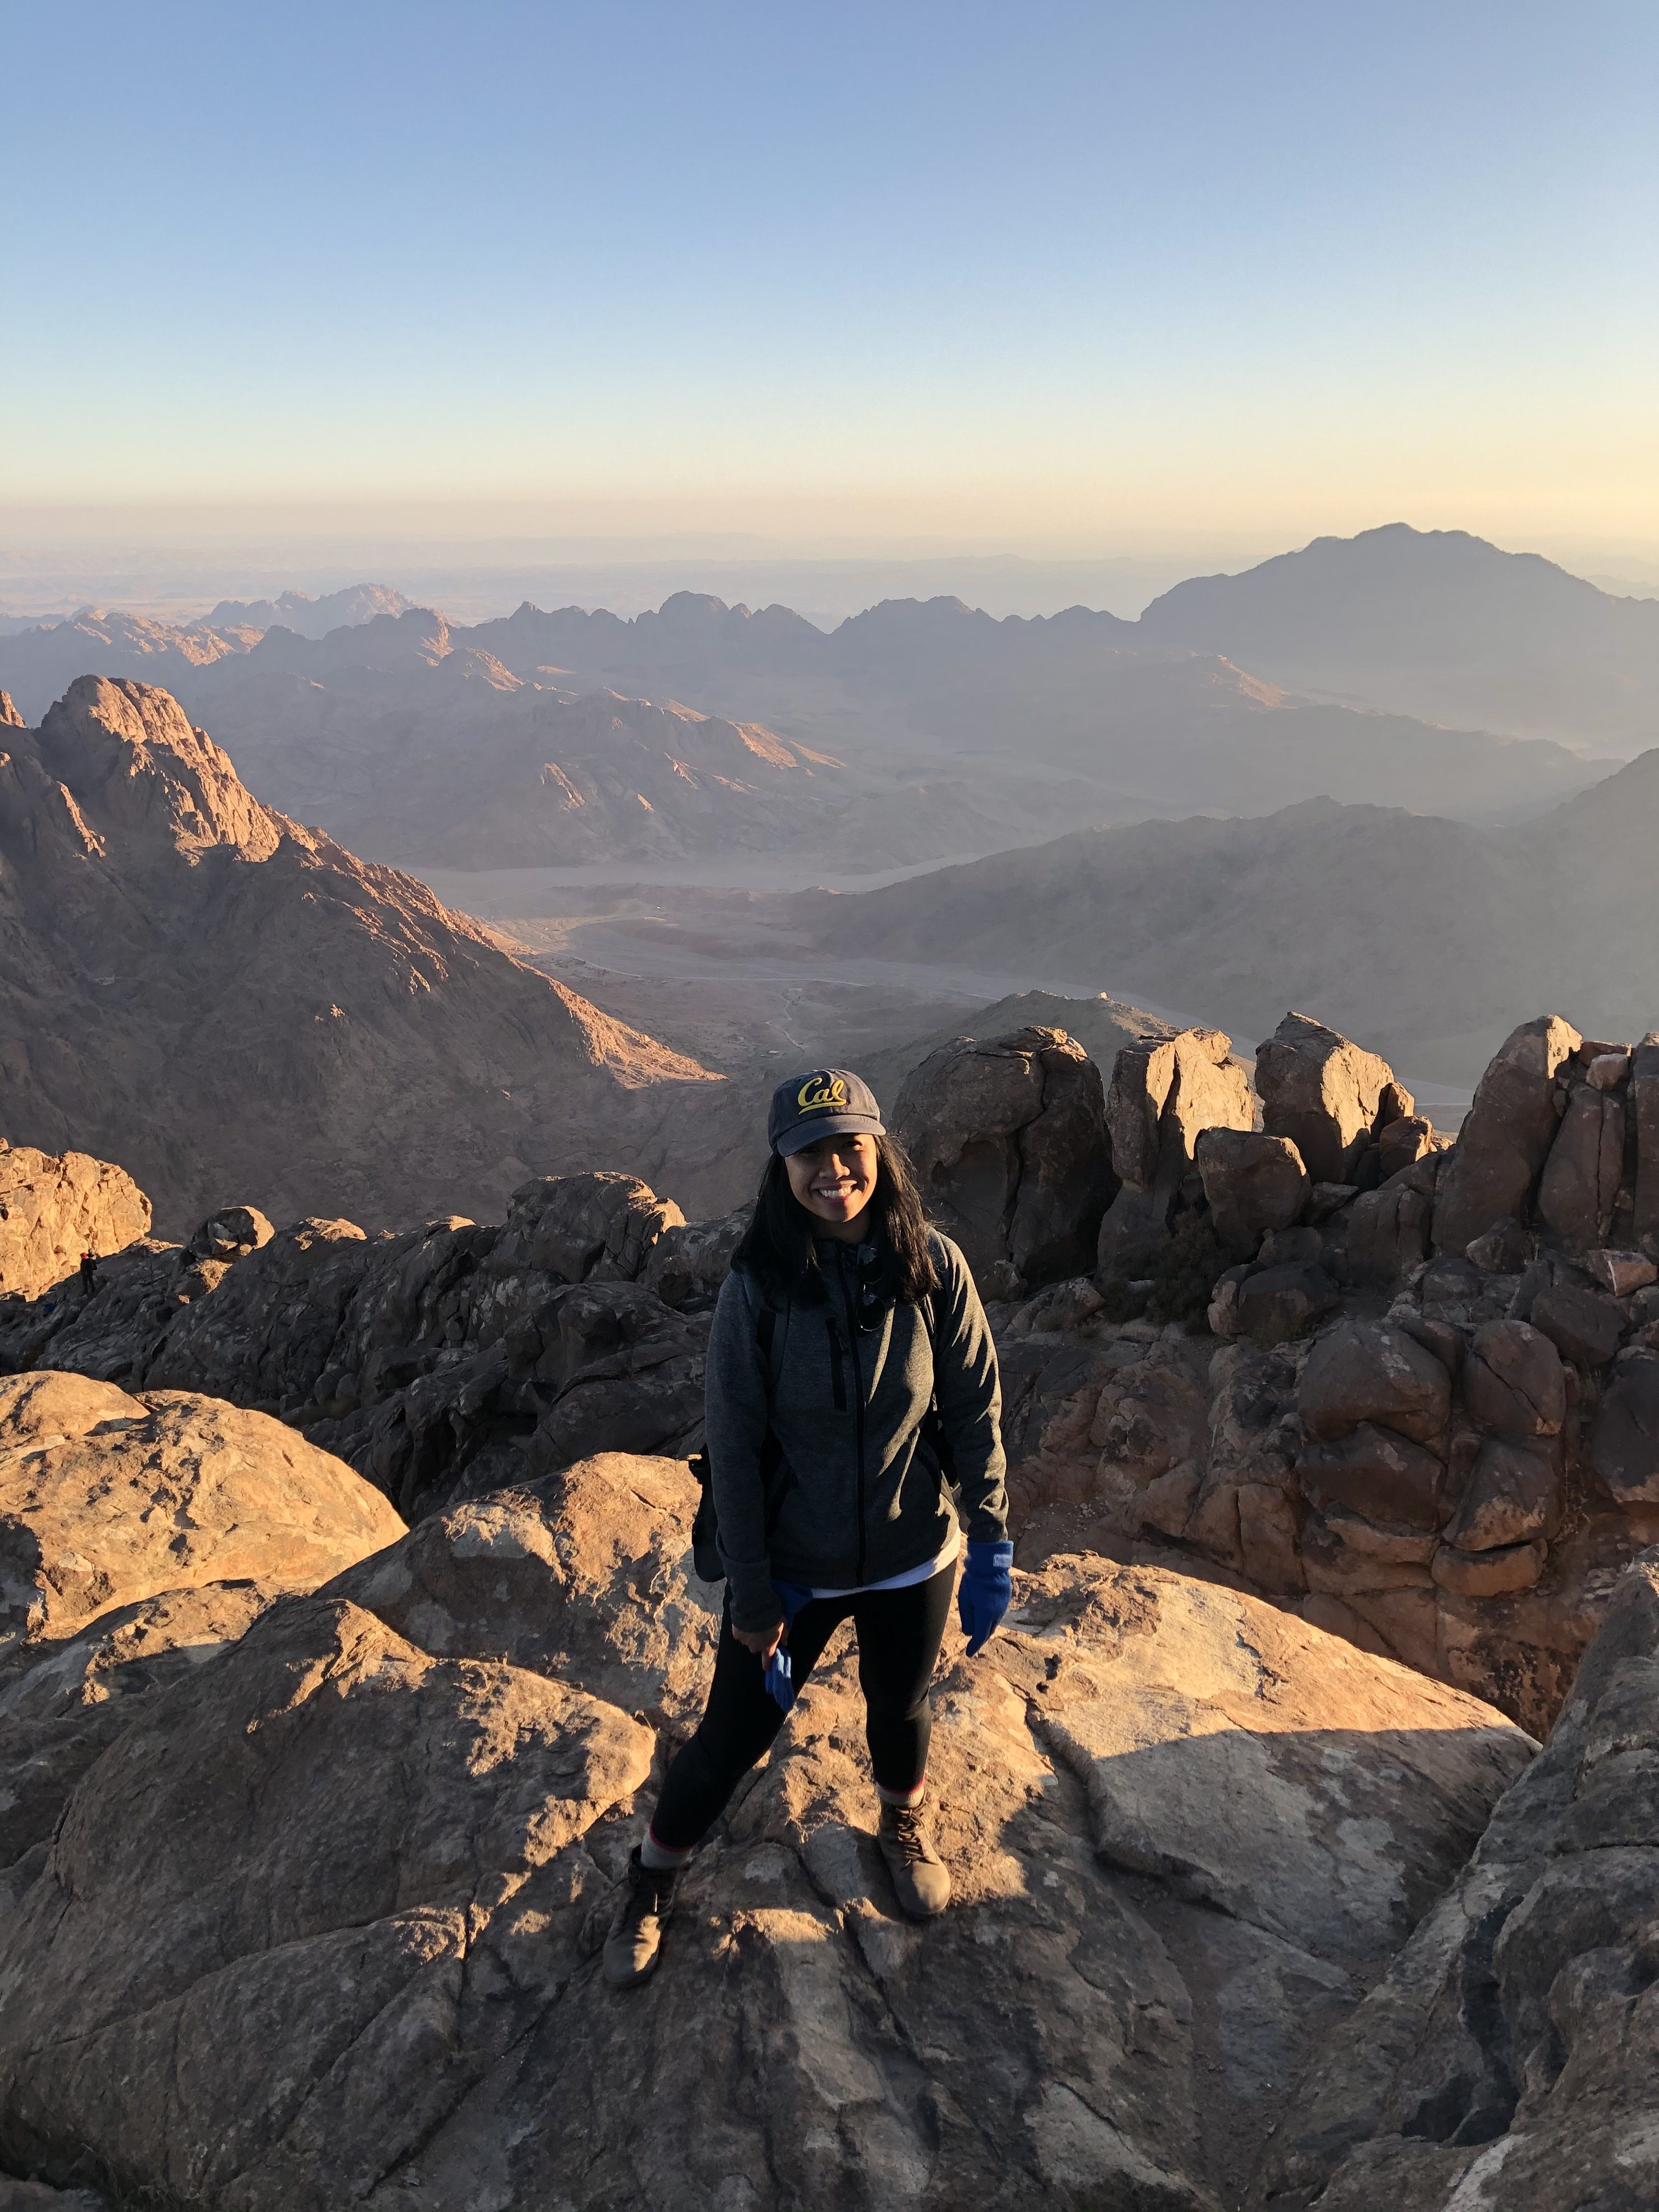 Jelly smiles from a sunrise viewpoint on Mount Sinai in Egypt.